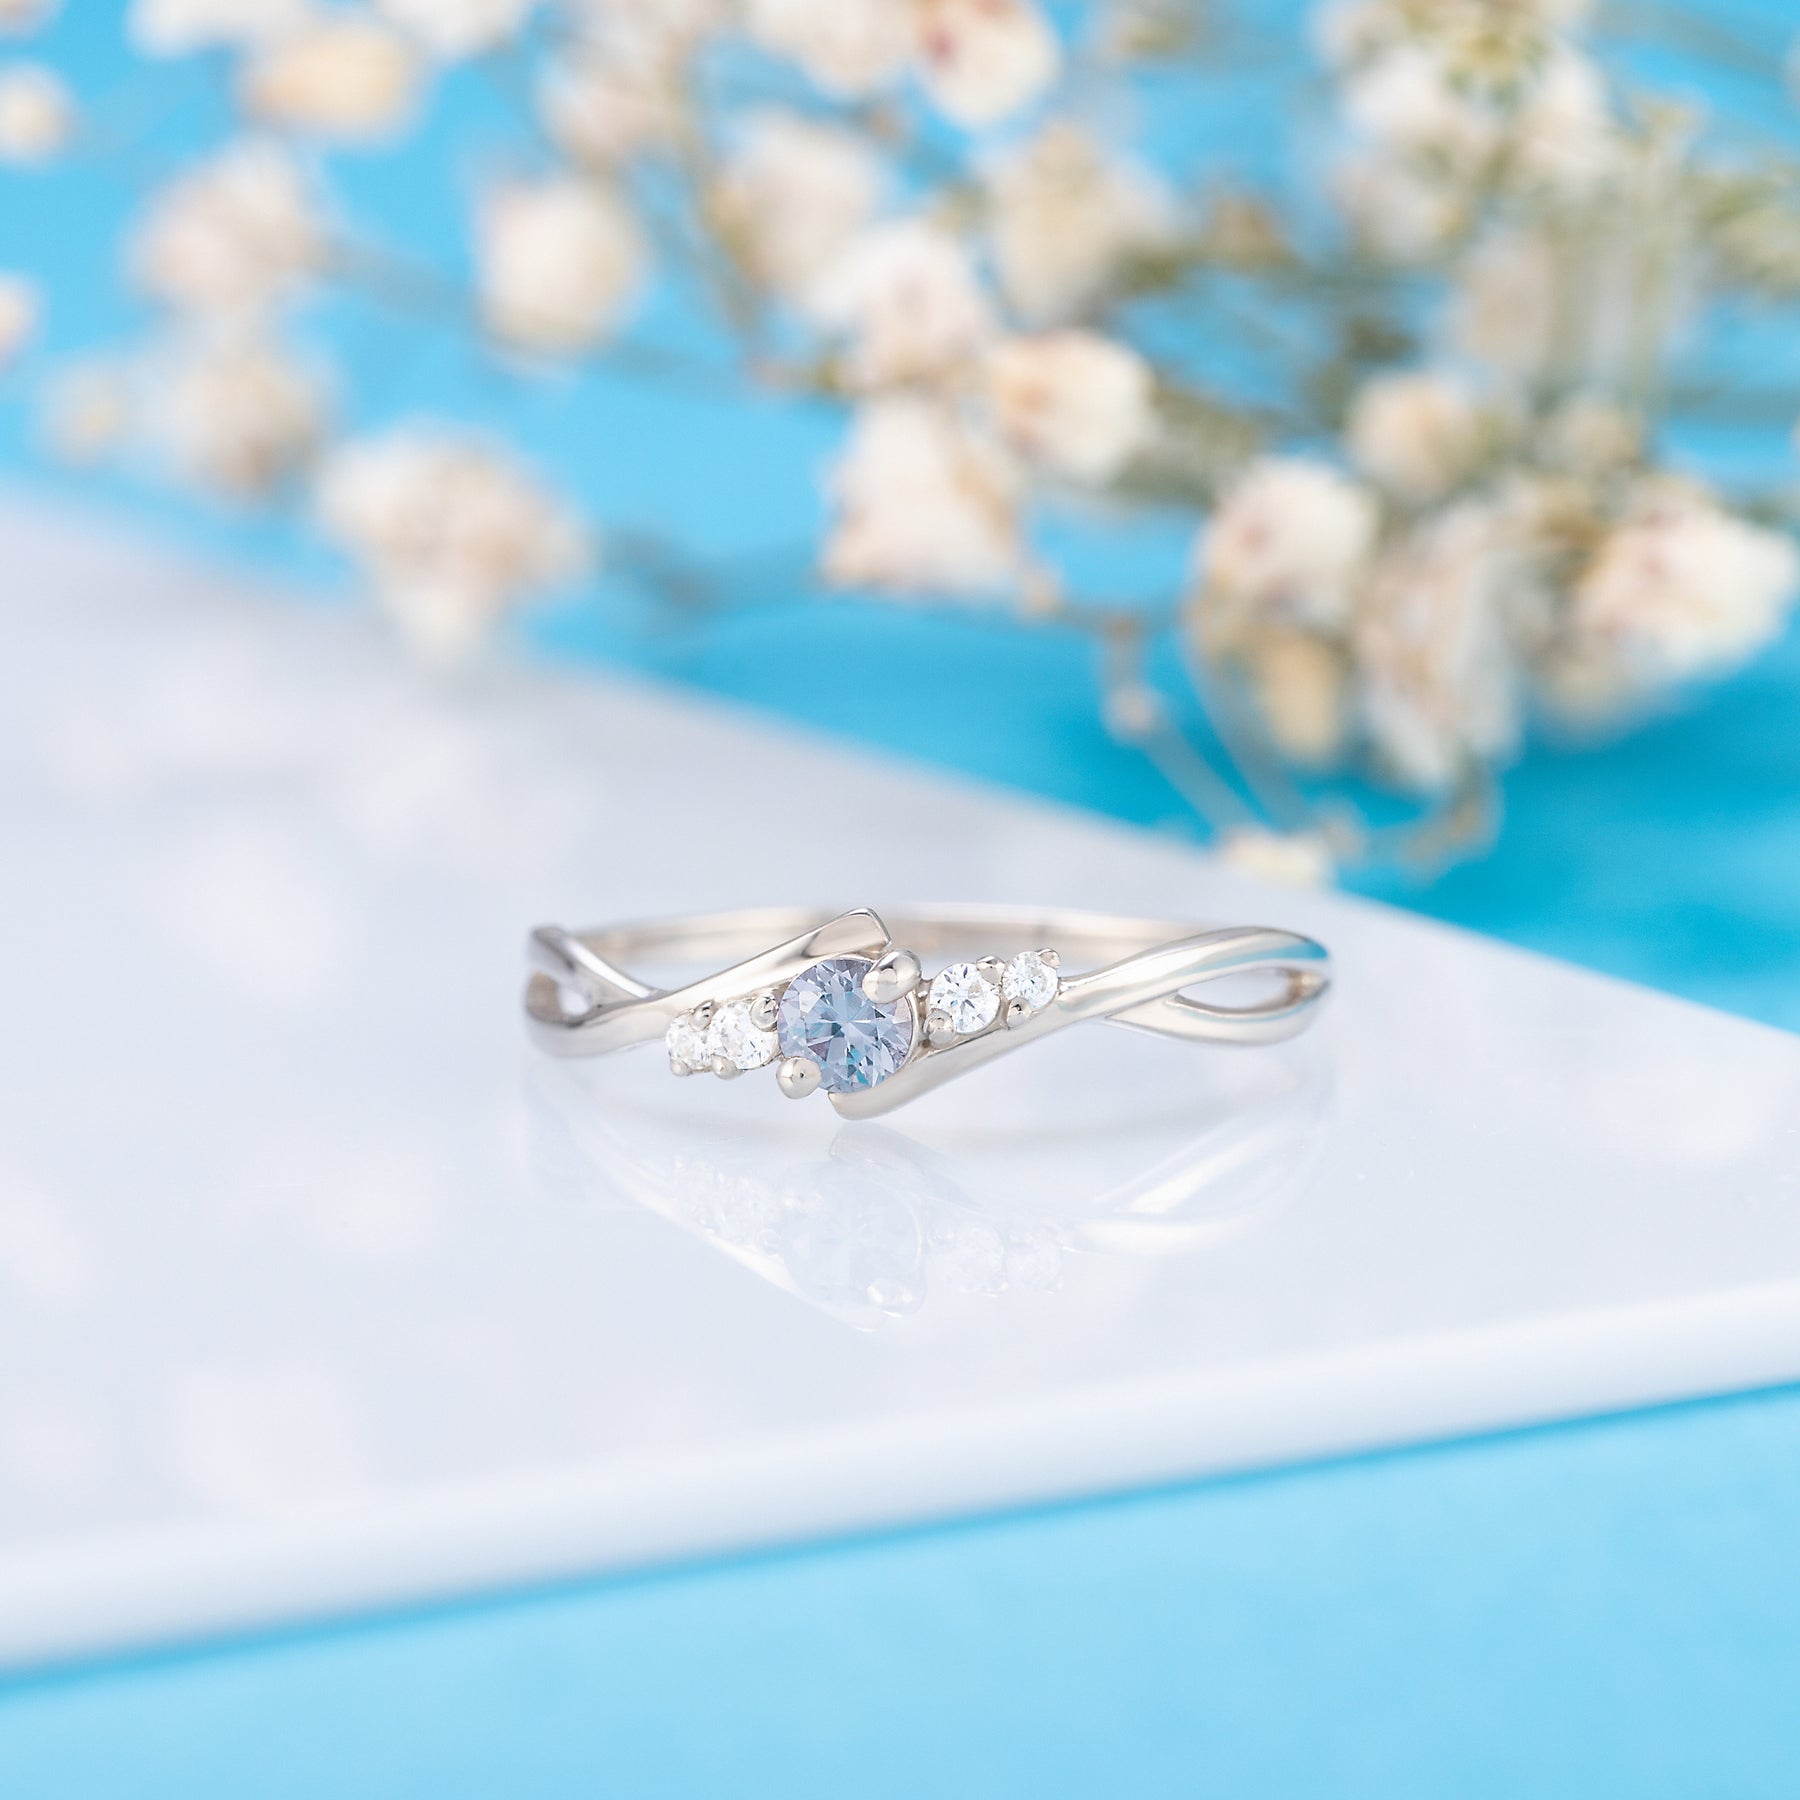 Unique & Dainty Promises Rings Handcrafted with Love – Tagged 